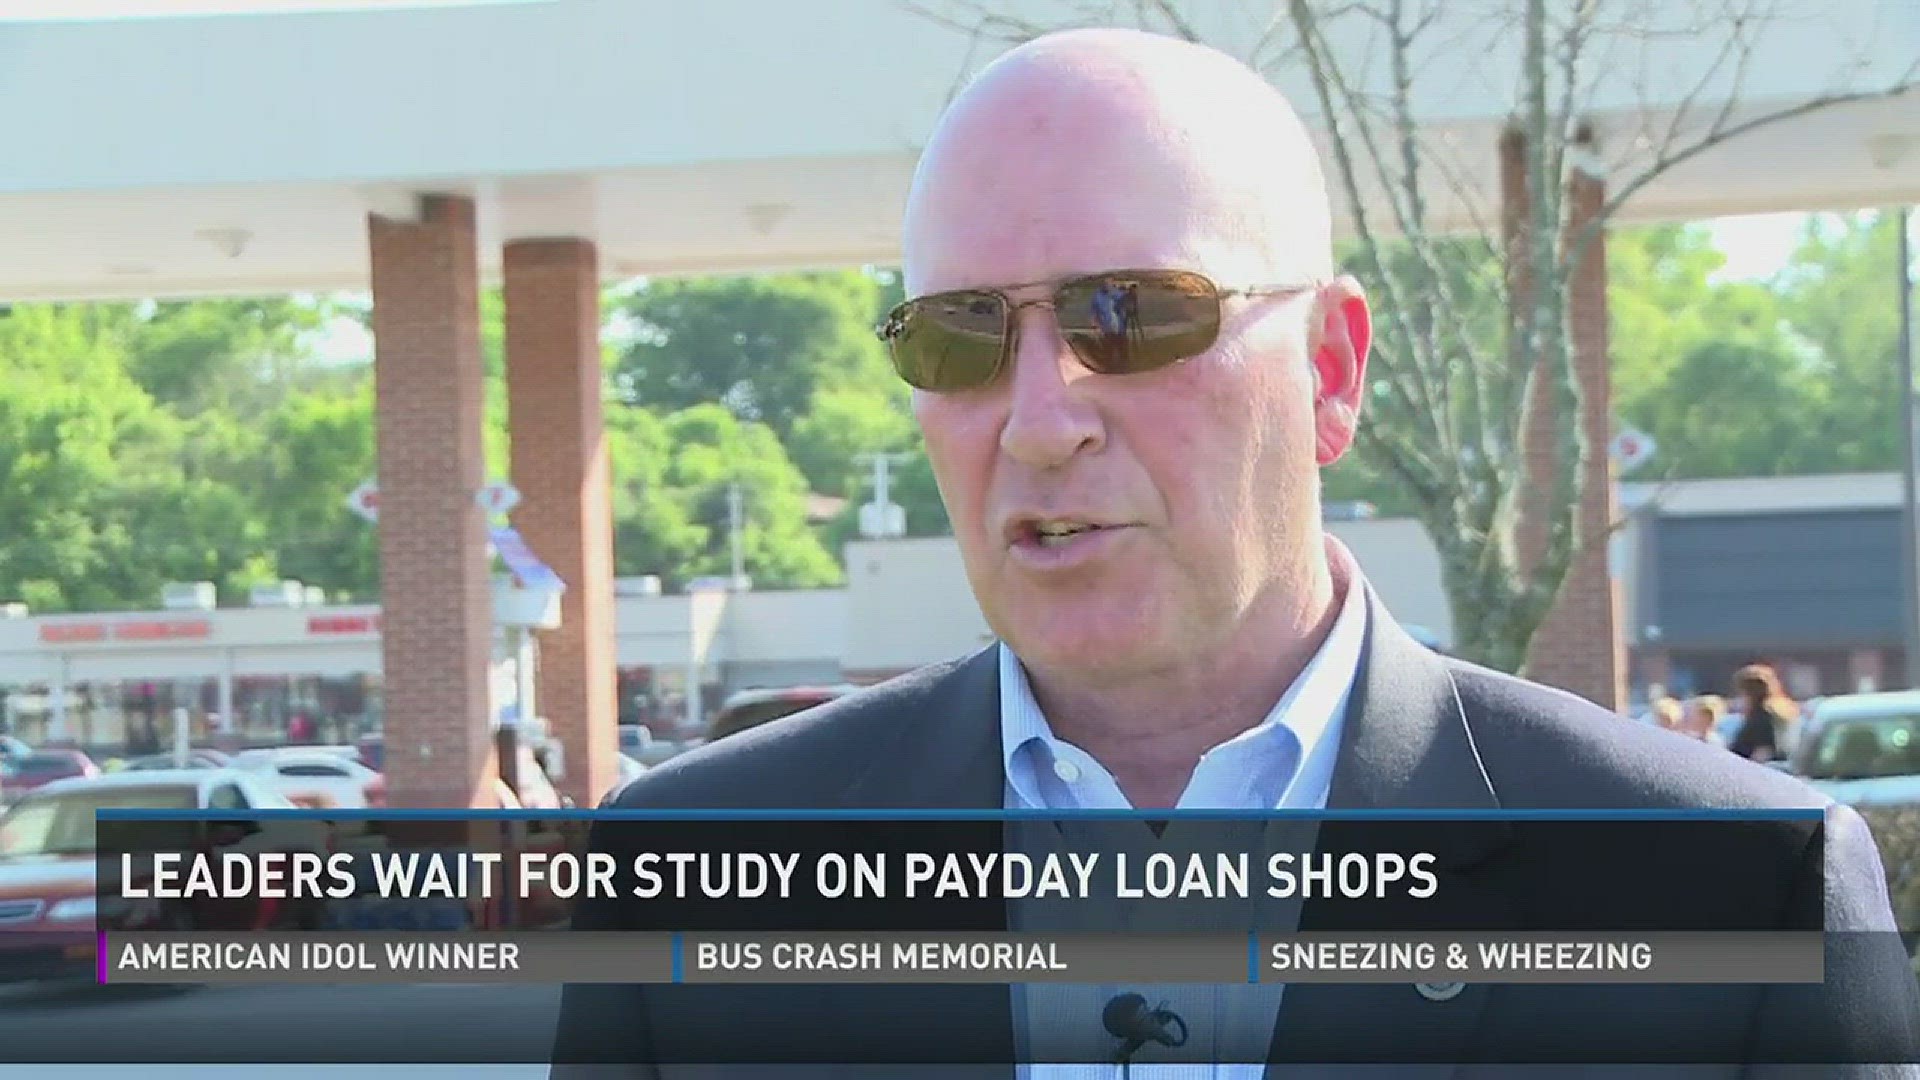 Payday loan shops are suddenly popping up widely in Knoxville. For one Knoxville councilman, that's a concern. May 13, 2015